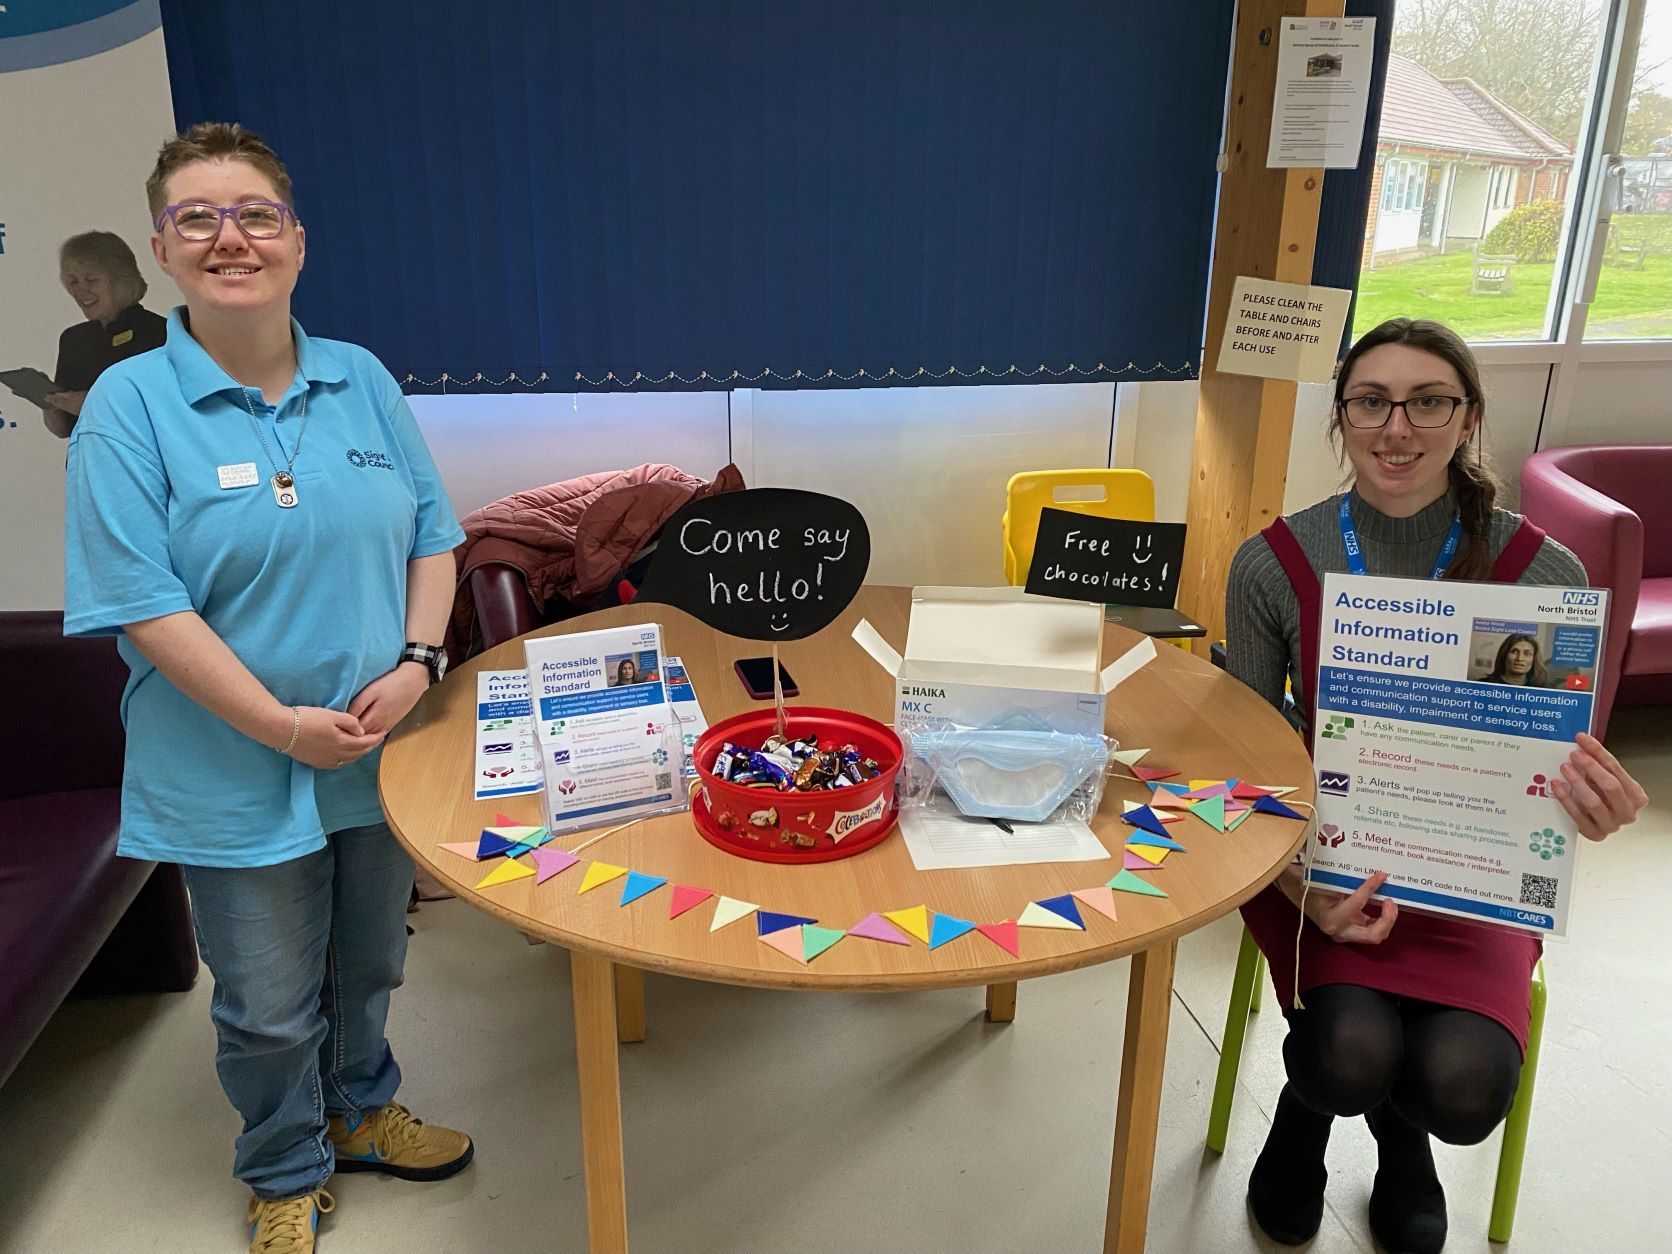 Bristol Sight Loss Council member Emma with North Bristol NHS Trust (NBT) staff member Rosie at a table with information on AIS in NBT Maternity.